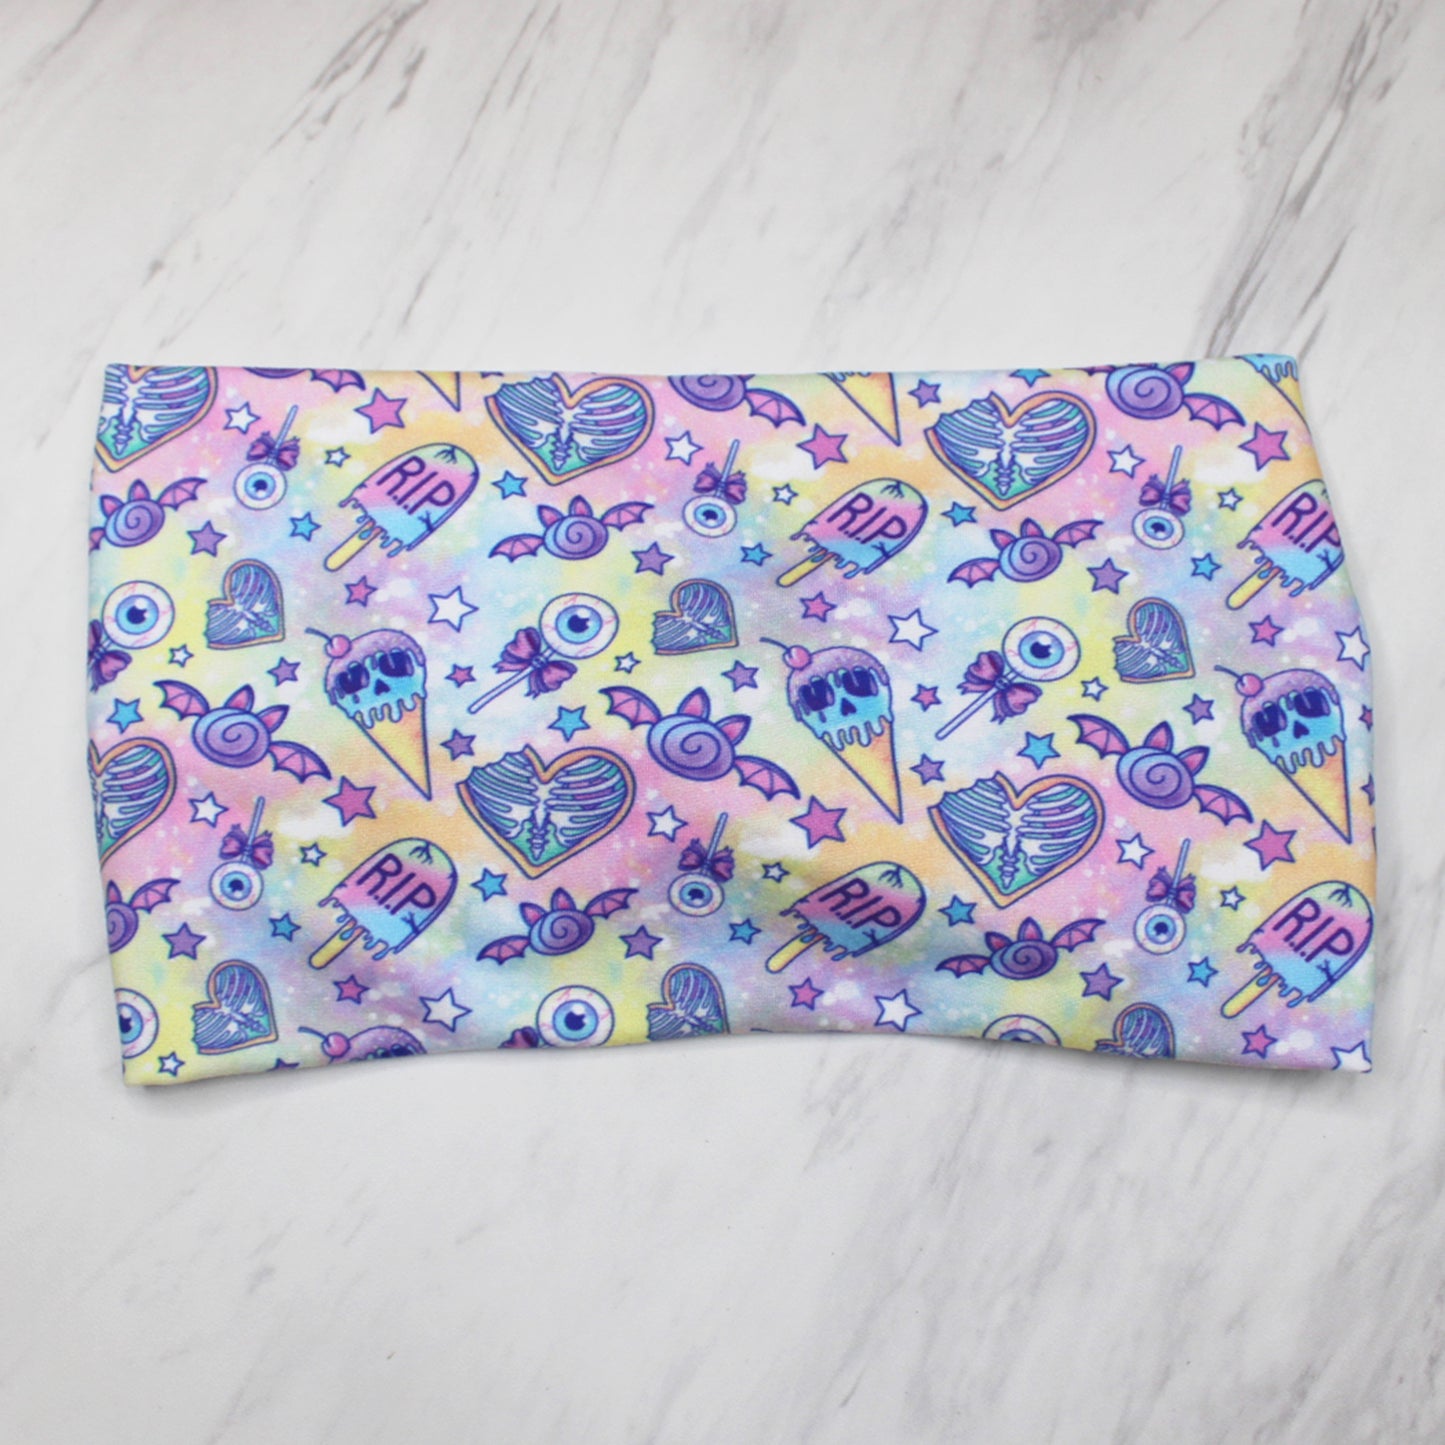 Wide Pastel Halloween Candy Print Headband for Women, Super Soft Collection